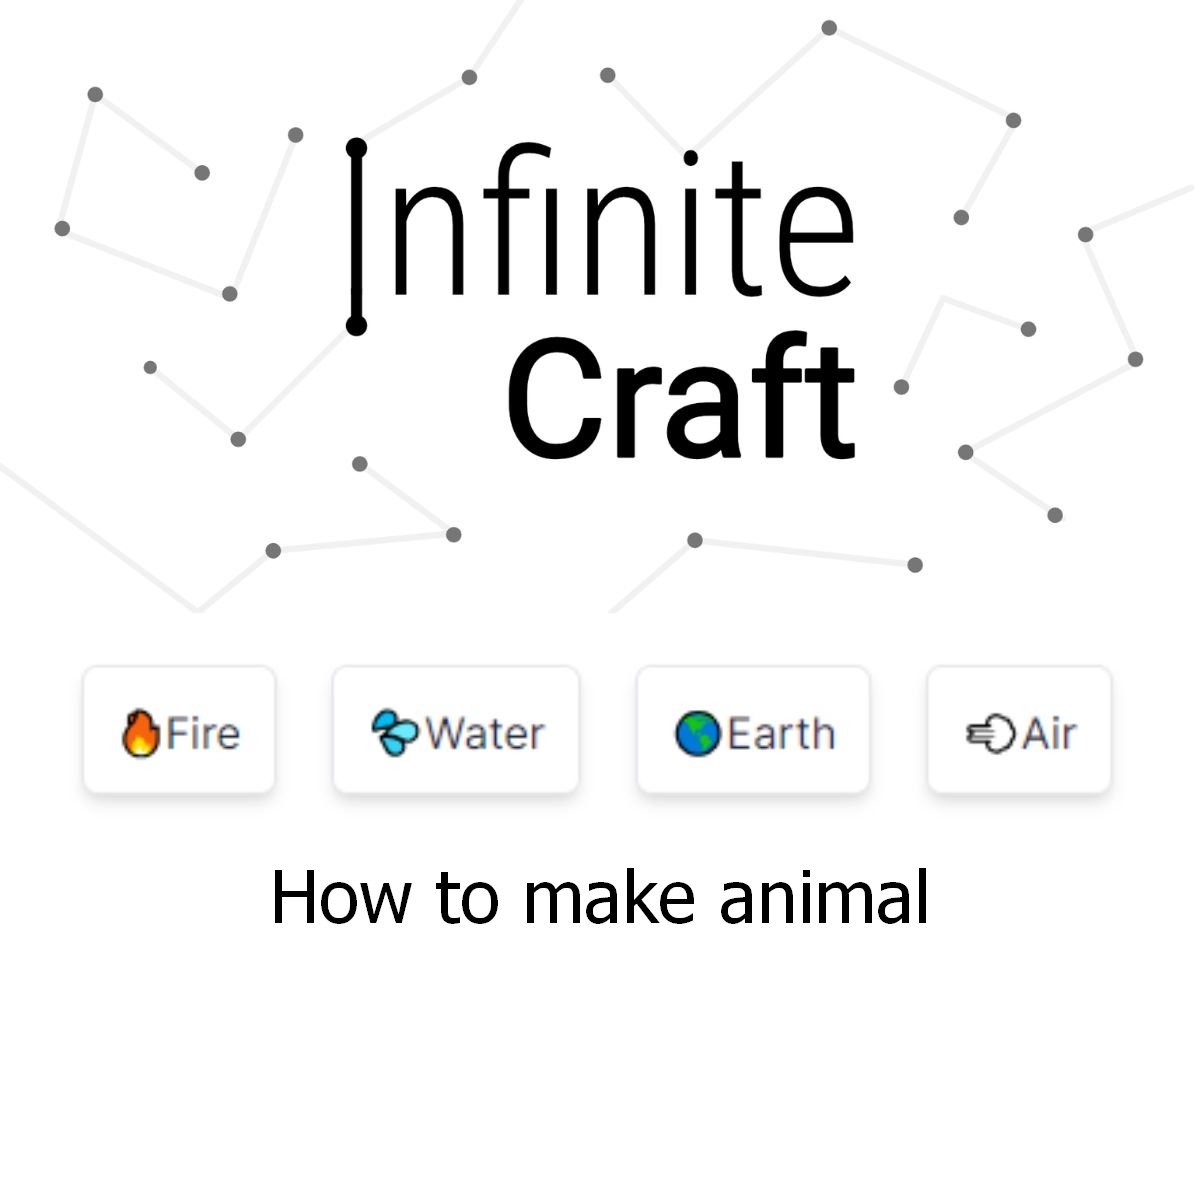 how to make animal in infinite craft